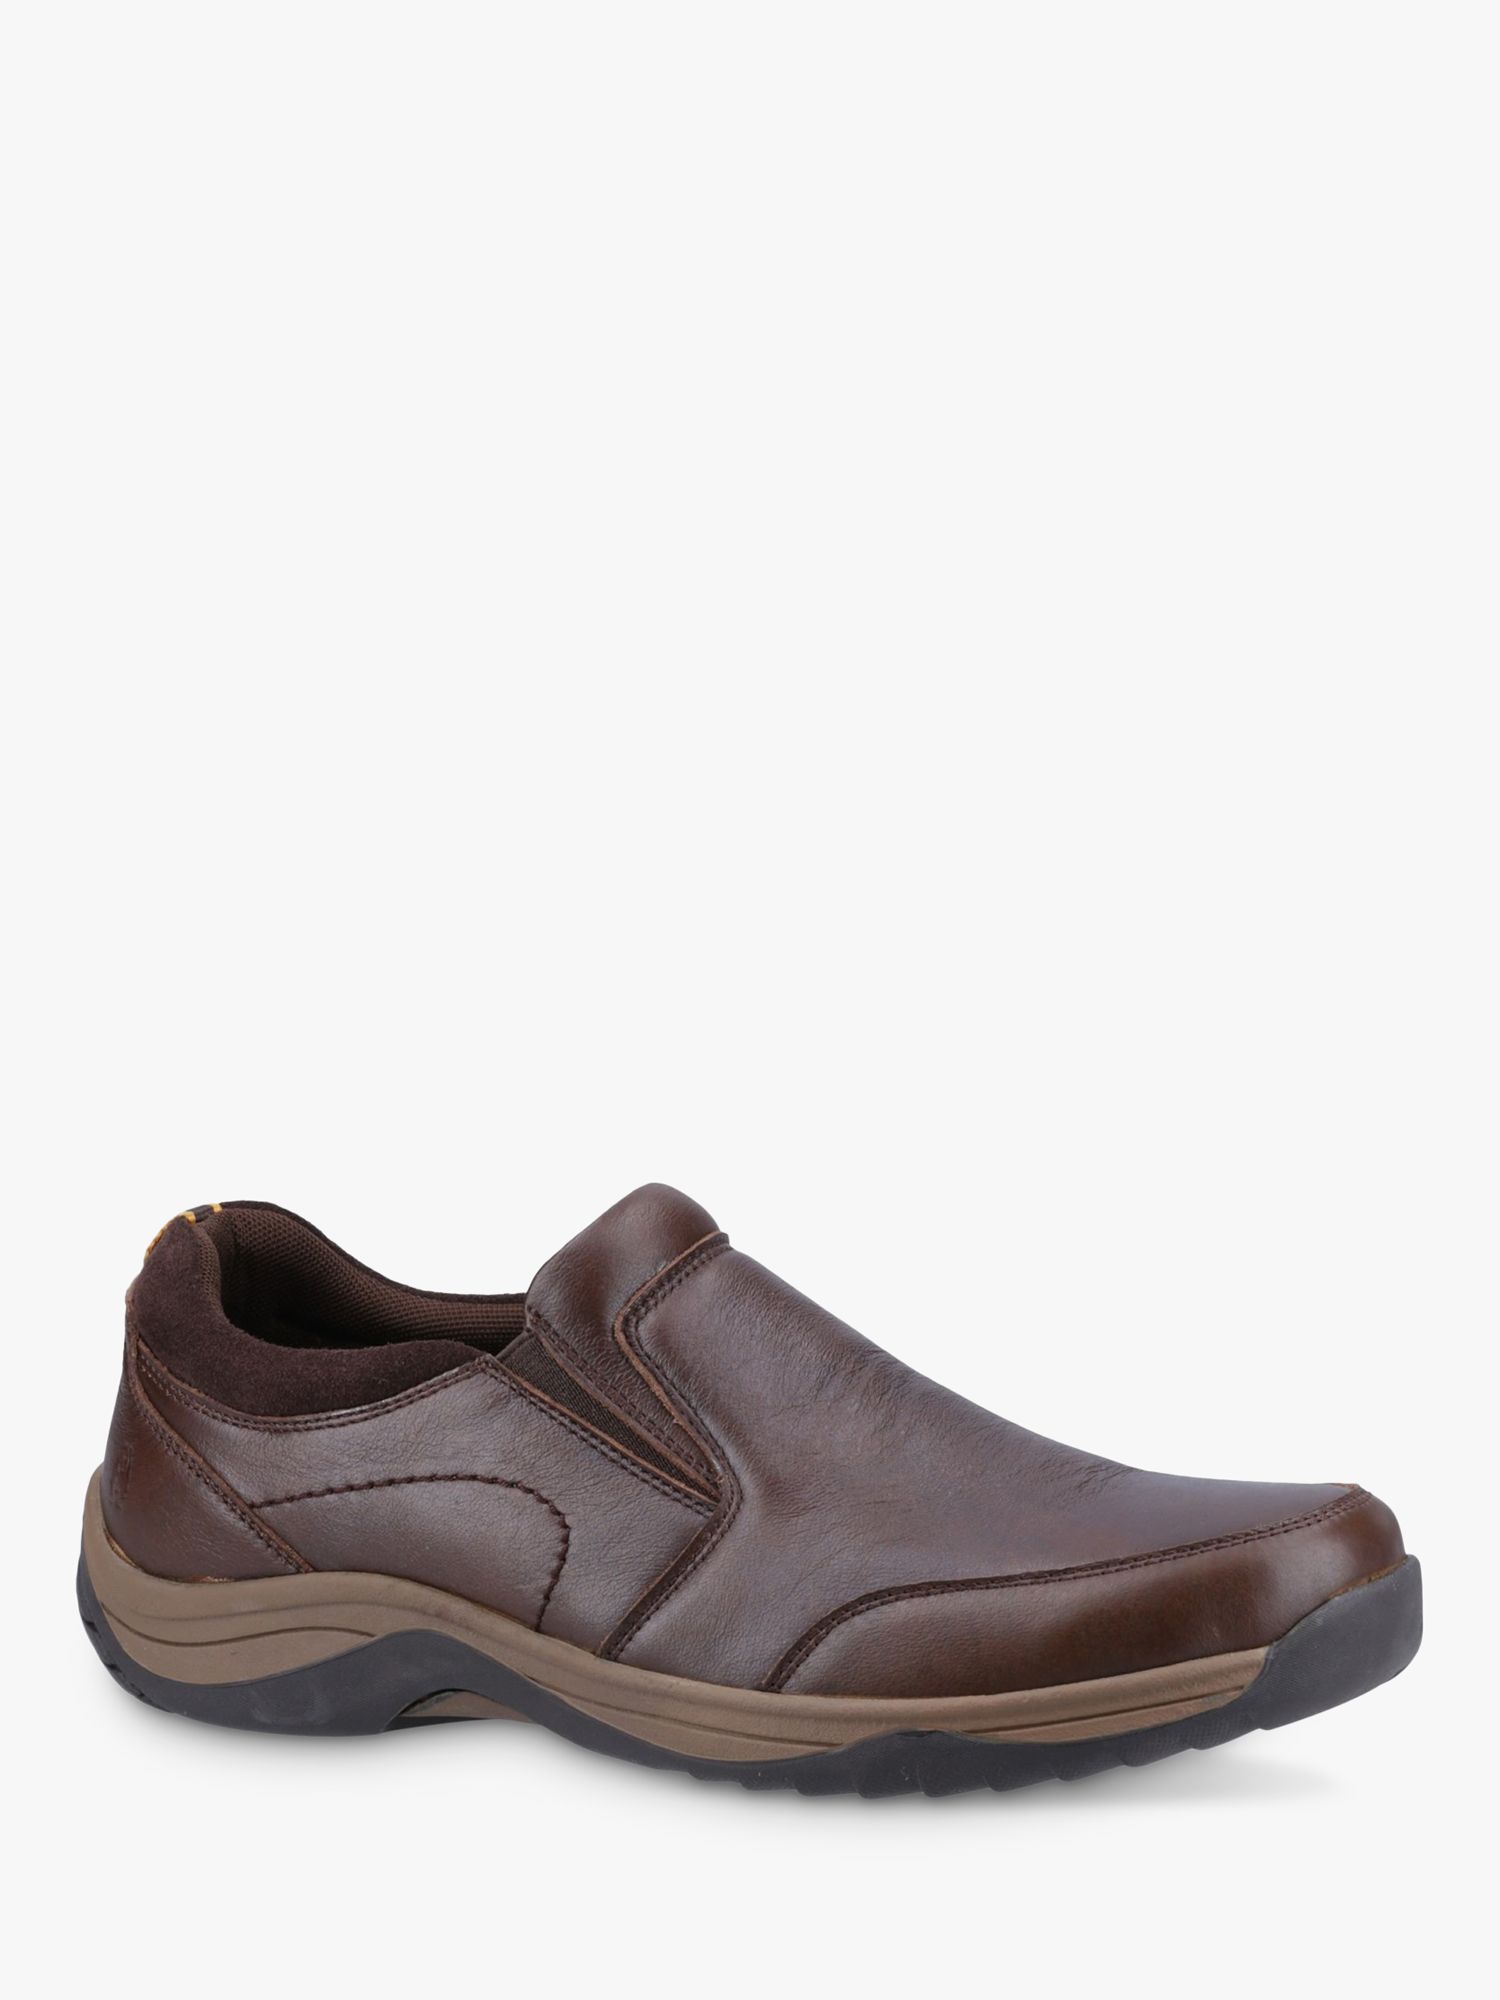 Hush Puppies Donald Leather Shoes, Coffee, 6